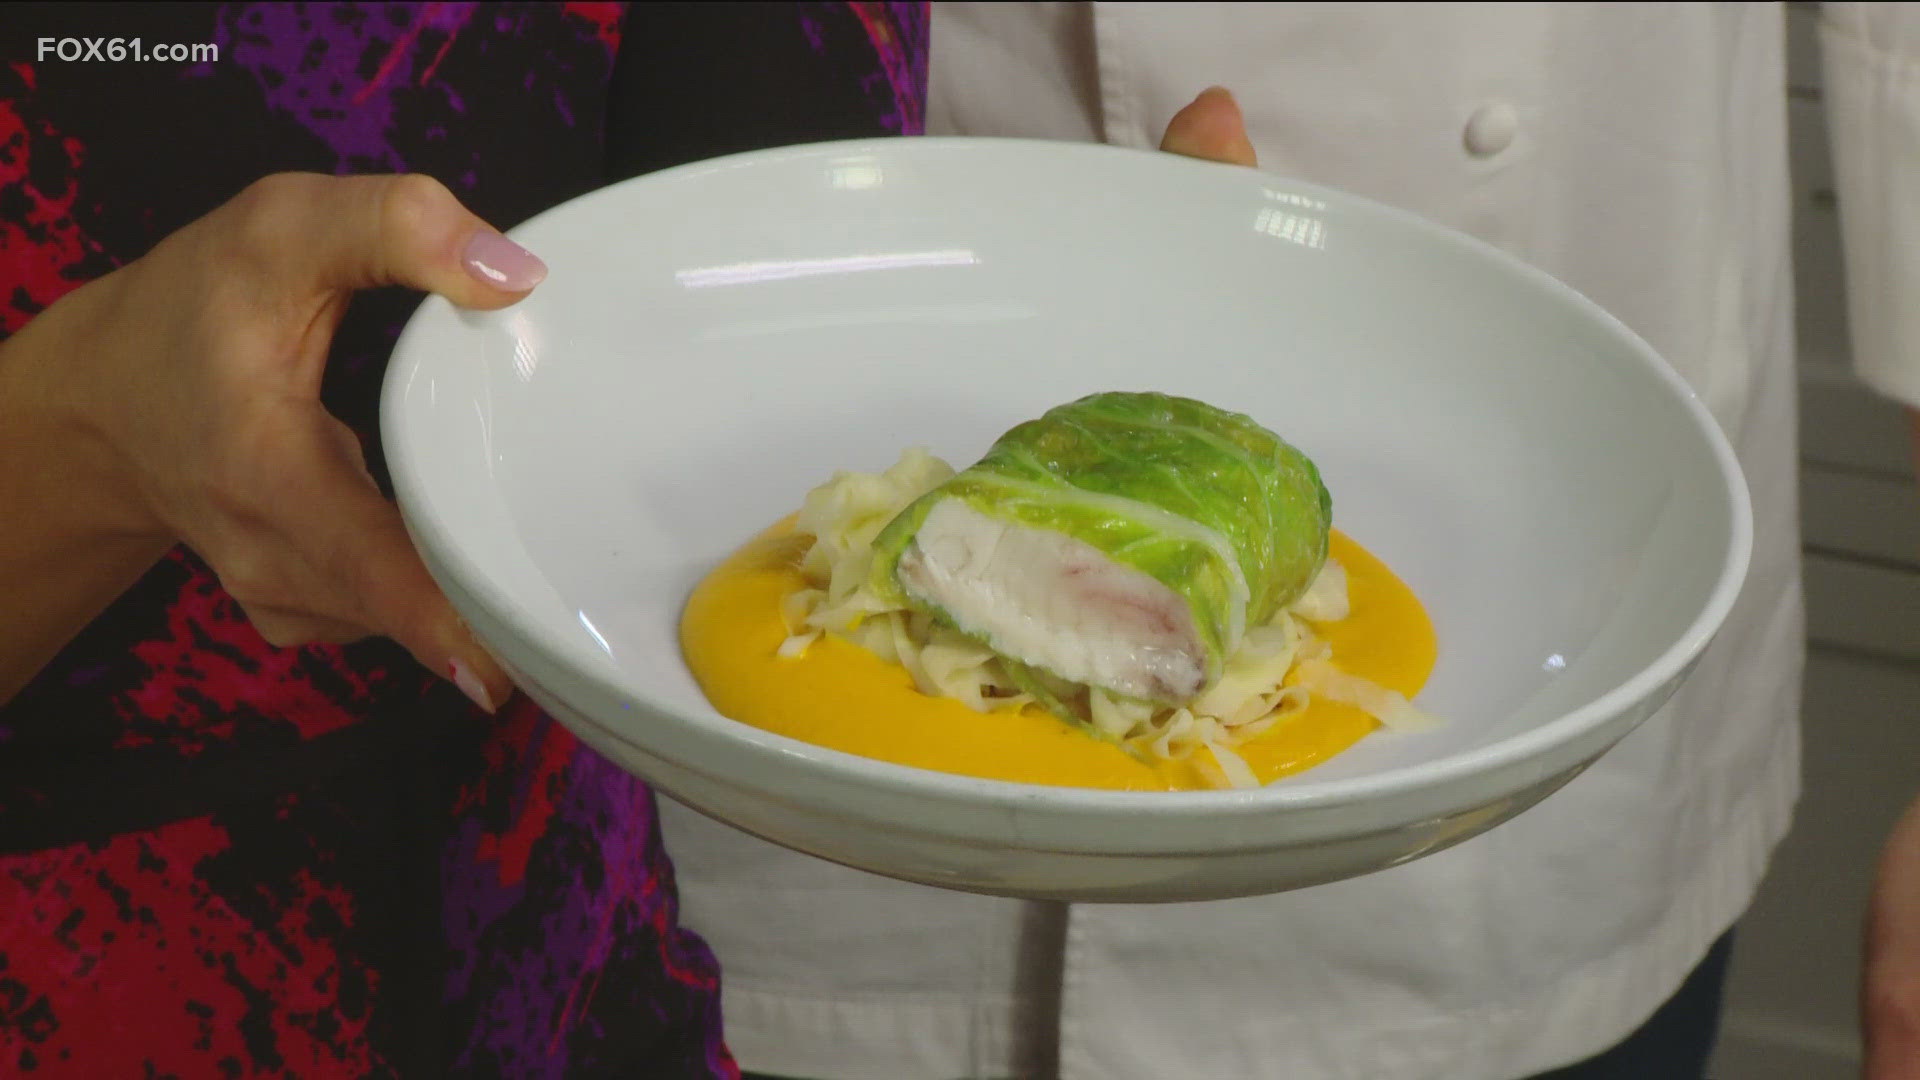 Present Company Restaurant in Tariffville shows us how to make this delicious take on the classic lobster roll and a napa cabbage-wrapped halibut dish.